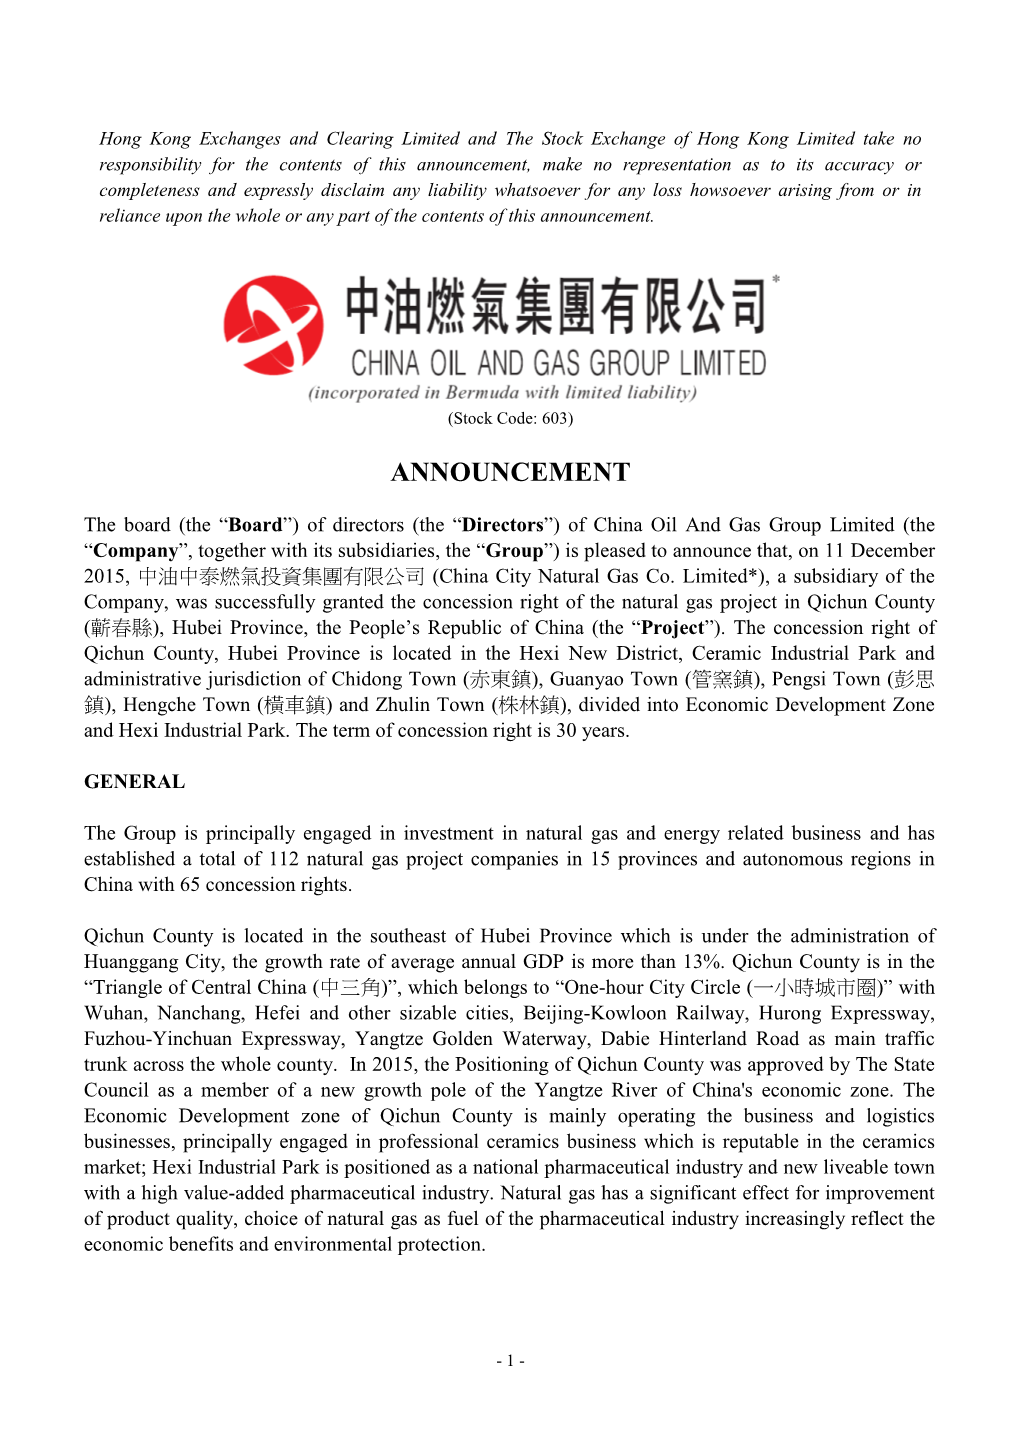 The Stock Exchange of Hong Kong Limited Takes No Responsibility for the Contents of This Announcement, Makes No Representation A